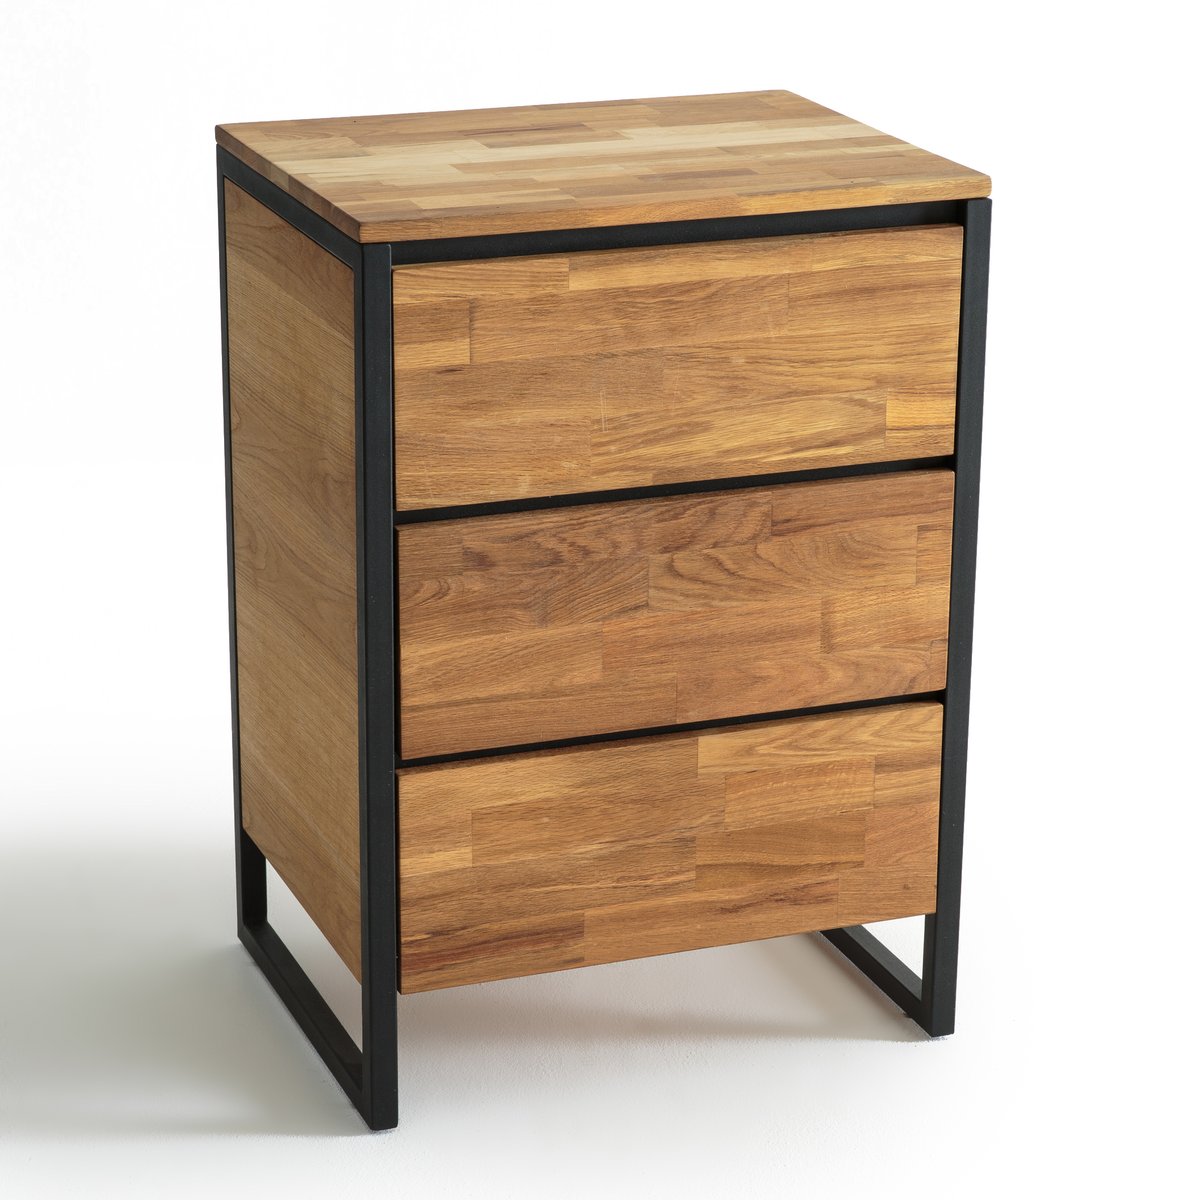 Image of HIBA Wood & Metal Chest of Drawers